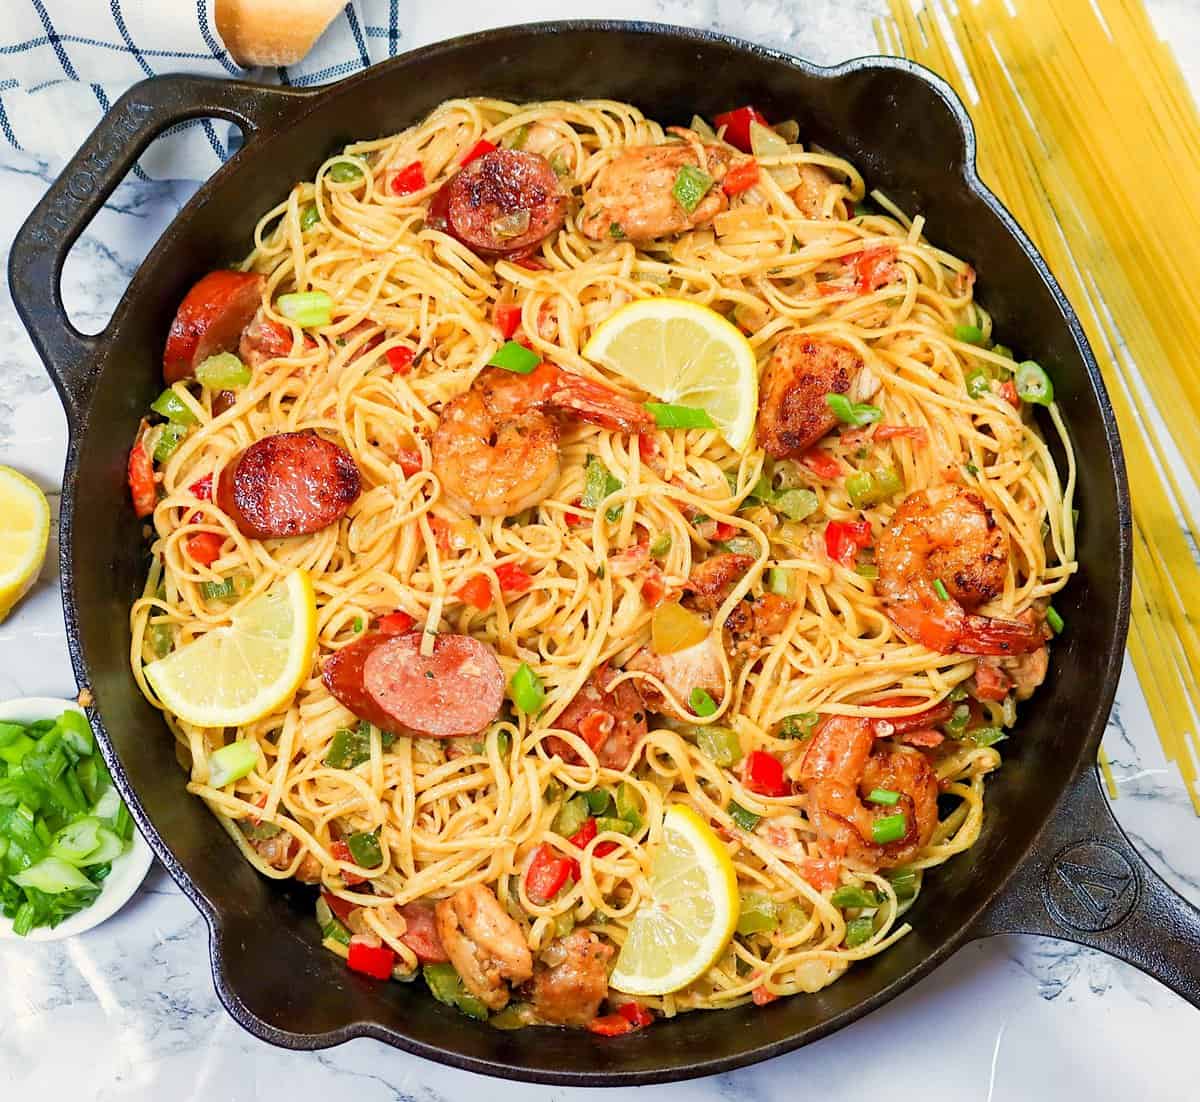 A fresh skillet full of soul-satisfying Pastalaya with sausage, chicken, and shrimp